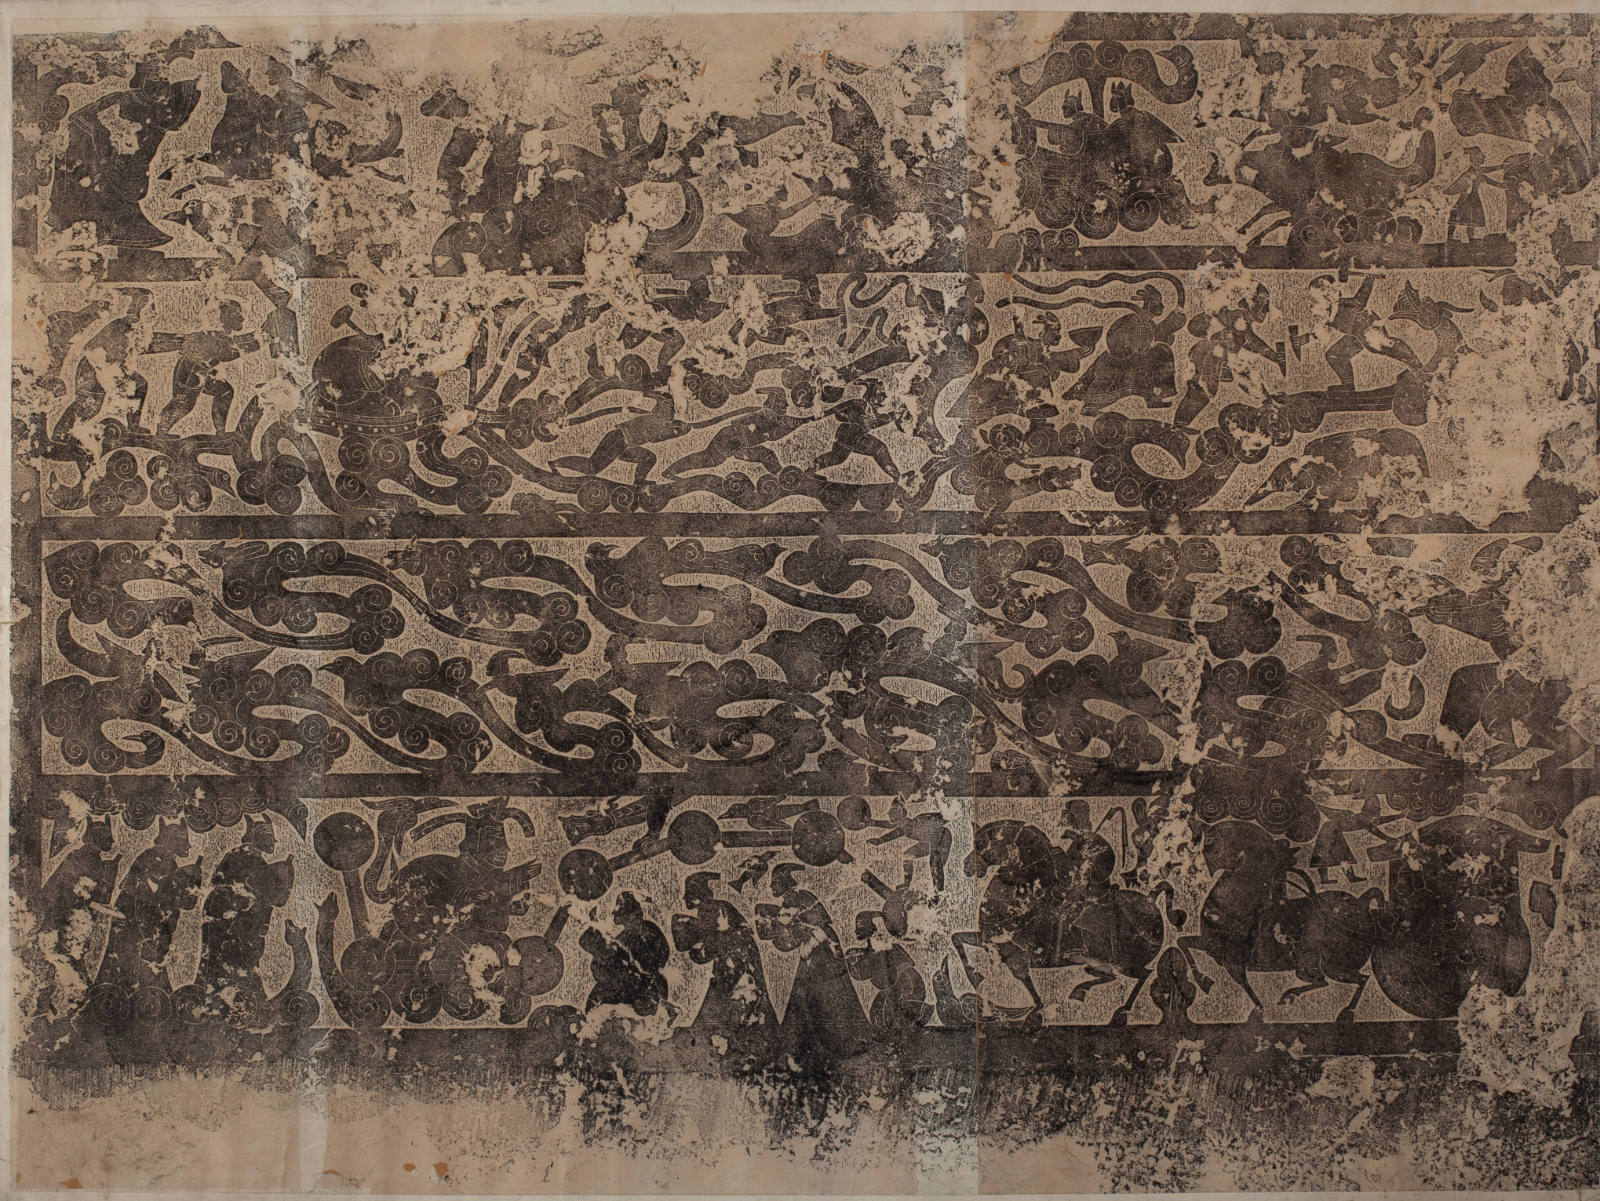 Rubbing from Wu Liang Ci: Section of a Carved Wall from the Wu Family Shrines, Rear Group no. 4